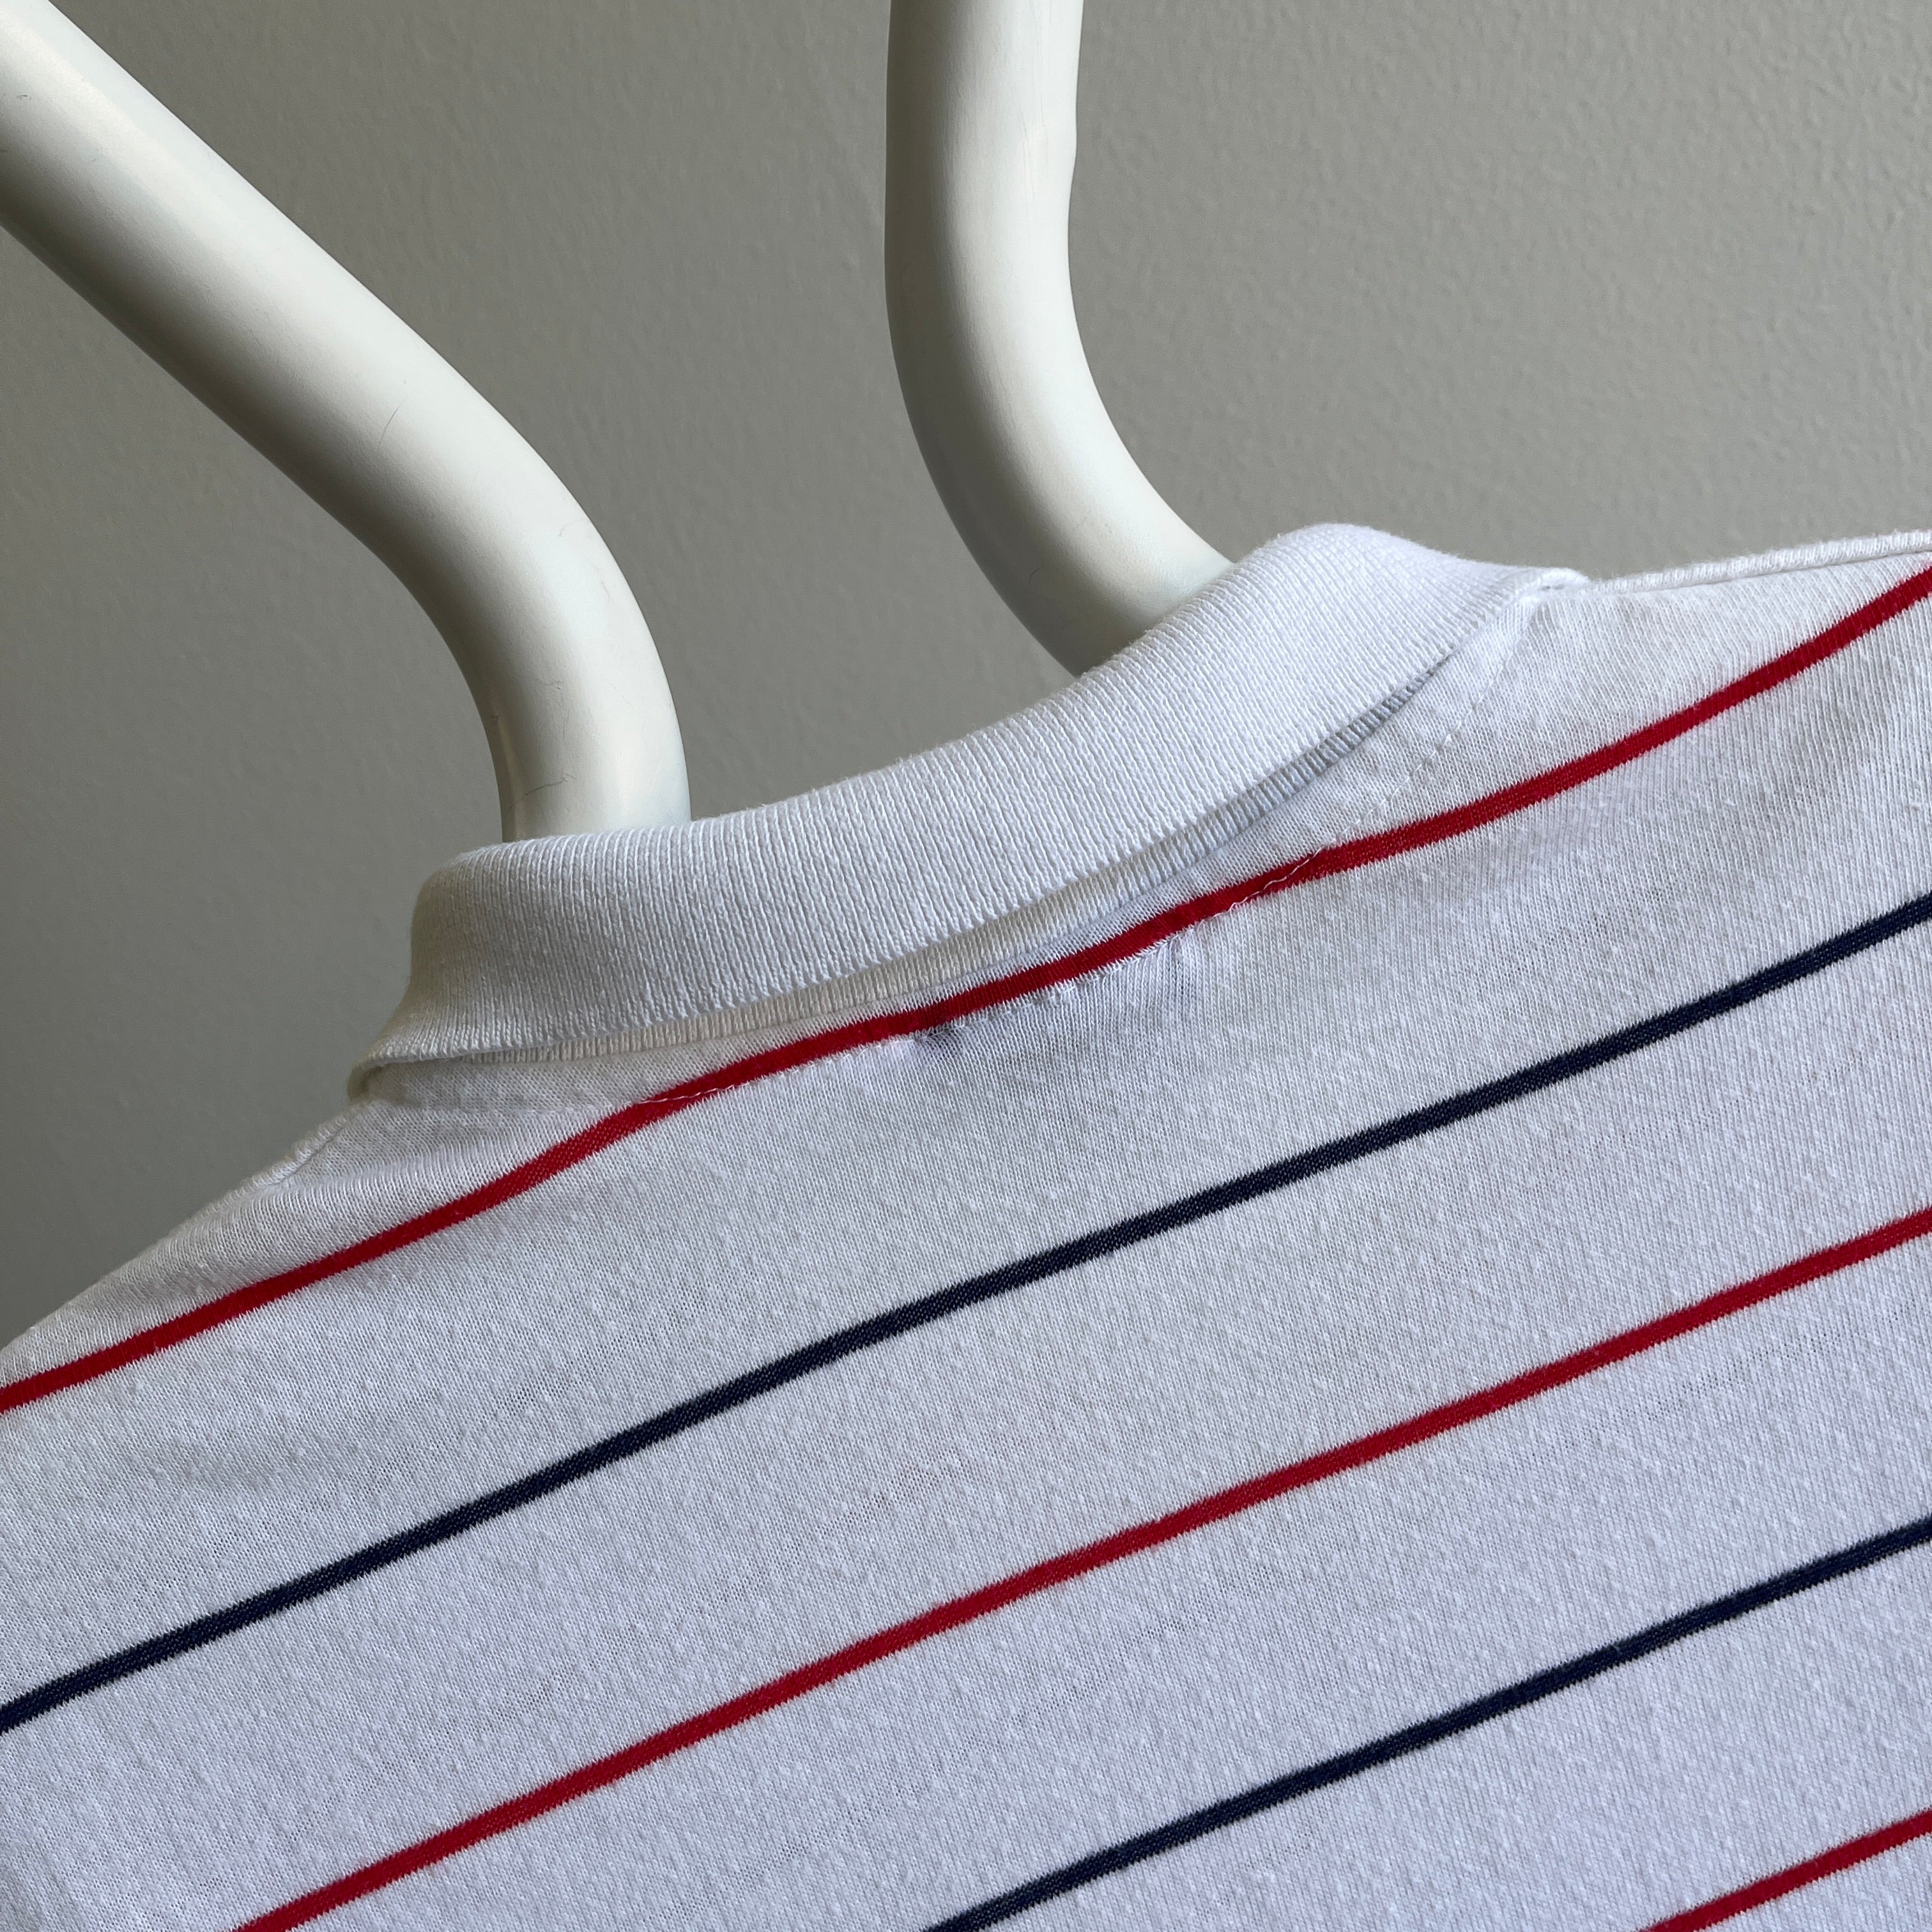 1990s Red and Blue Thin Striped Polo T-Shirt